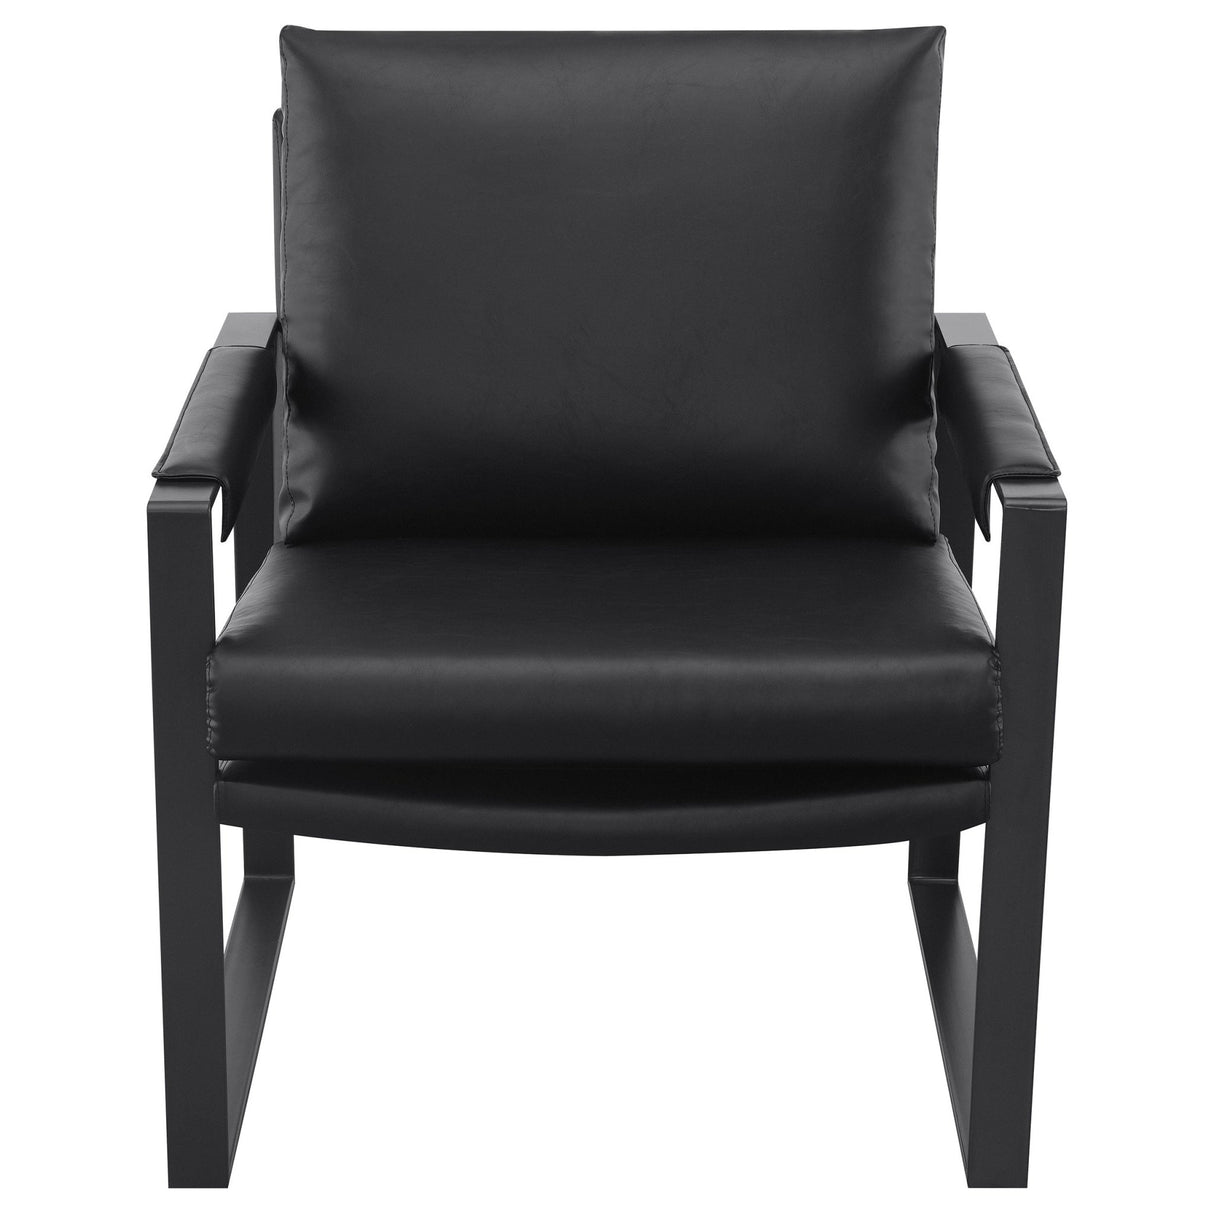 Accent Chair - Rosalind Upholstered Track Arms Accent Chair Black and Gummetal - Accent Chairs - 903021 - image - 2